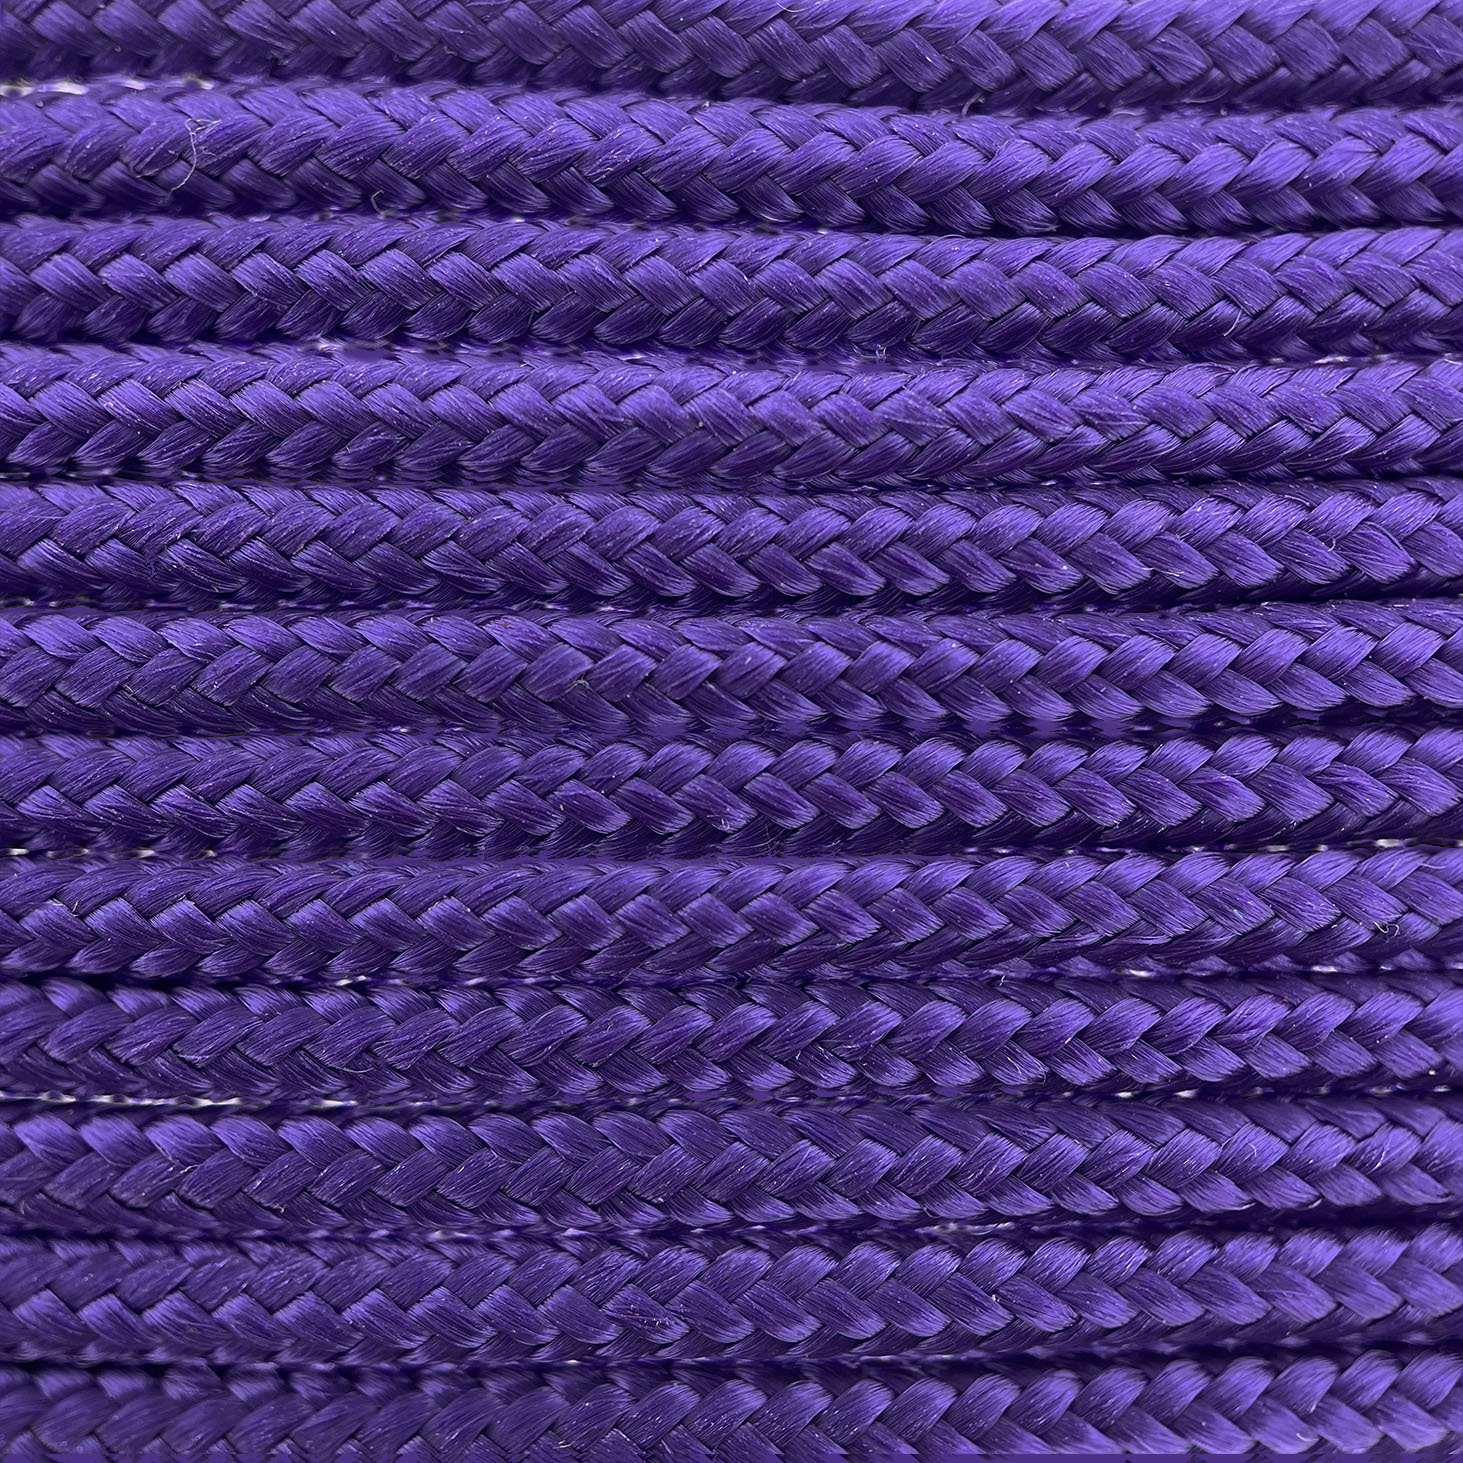 Buy Paracord 275 2MM Deep Purple from the expert - 123Paracord